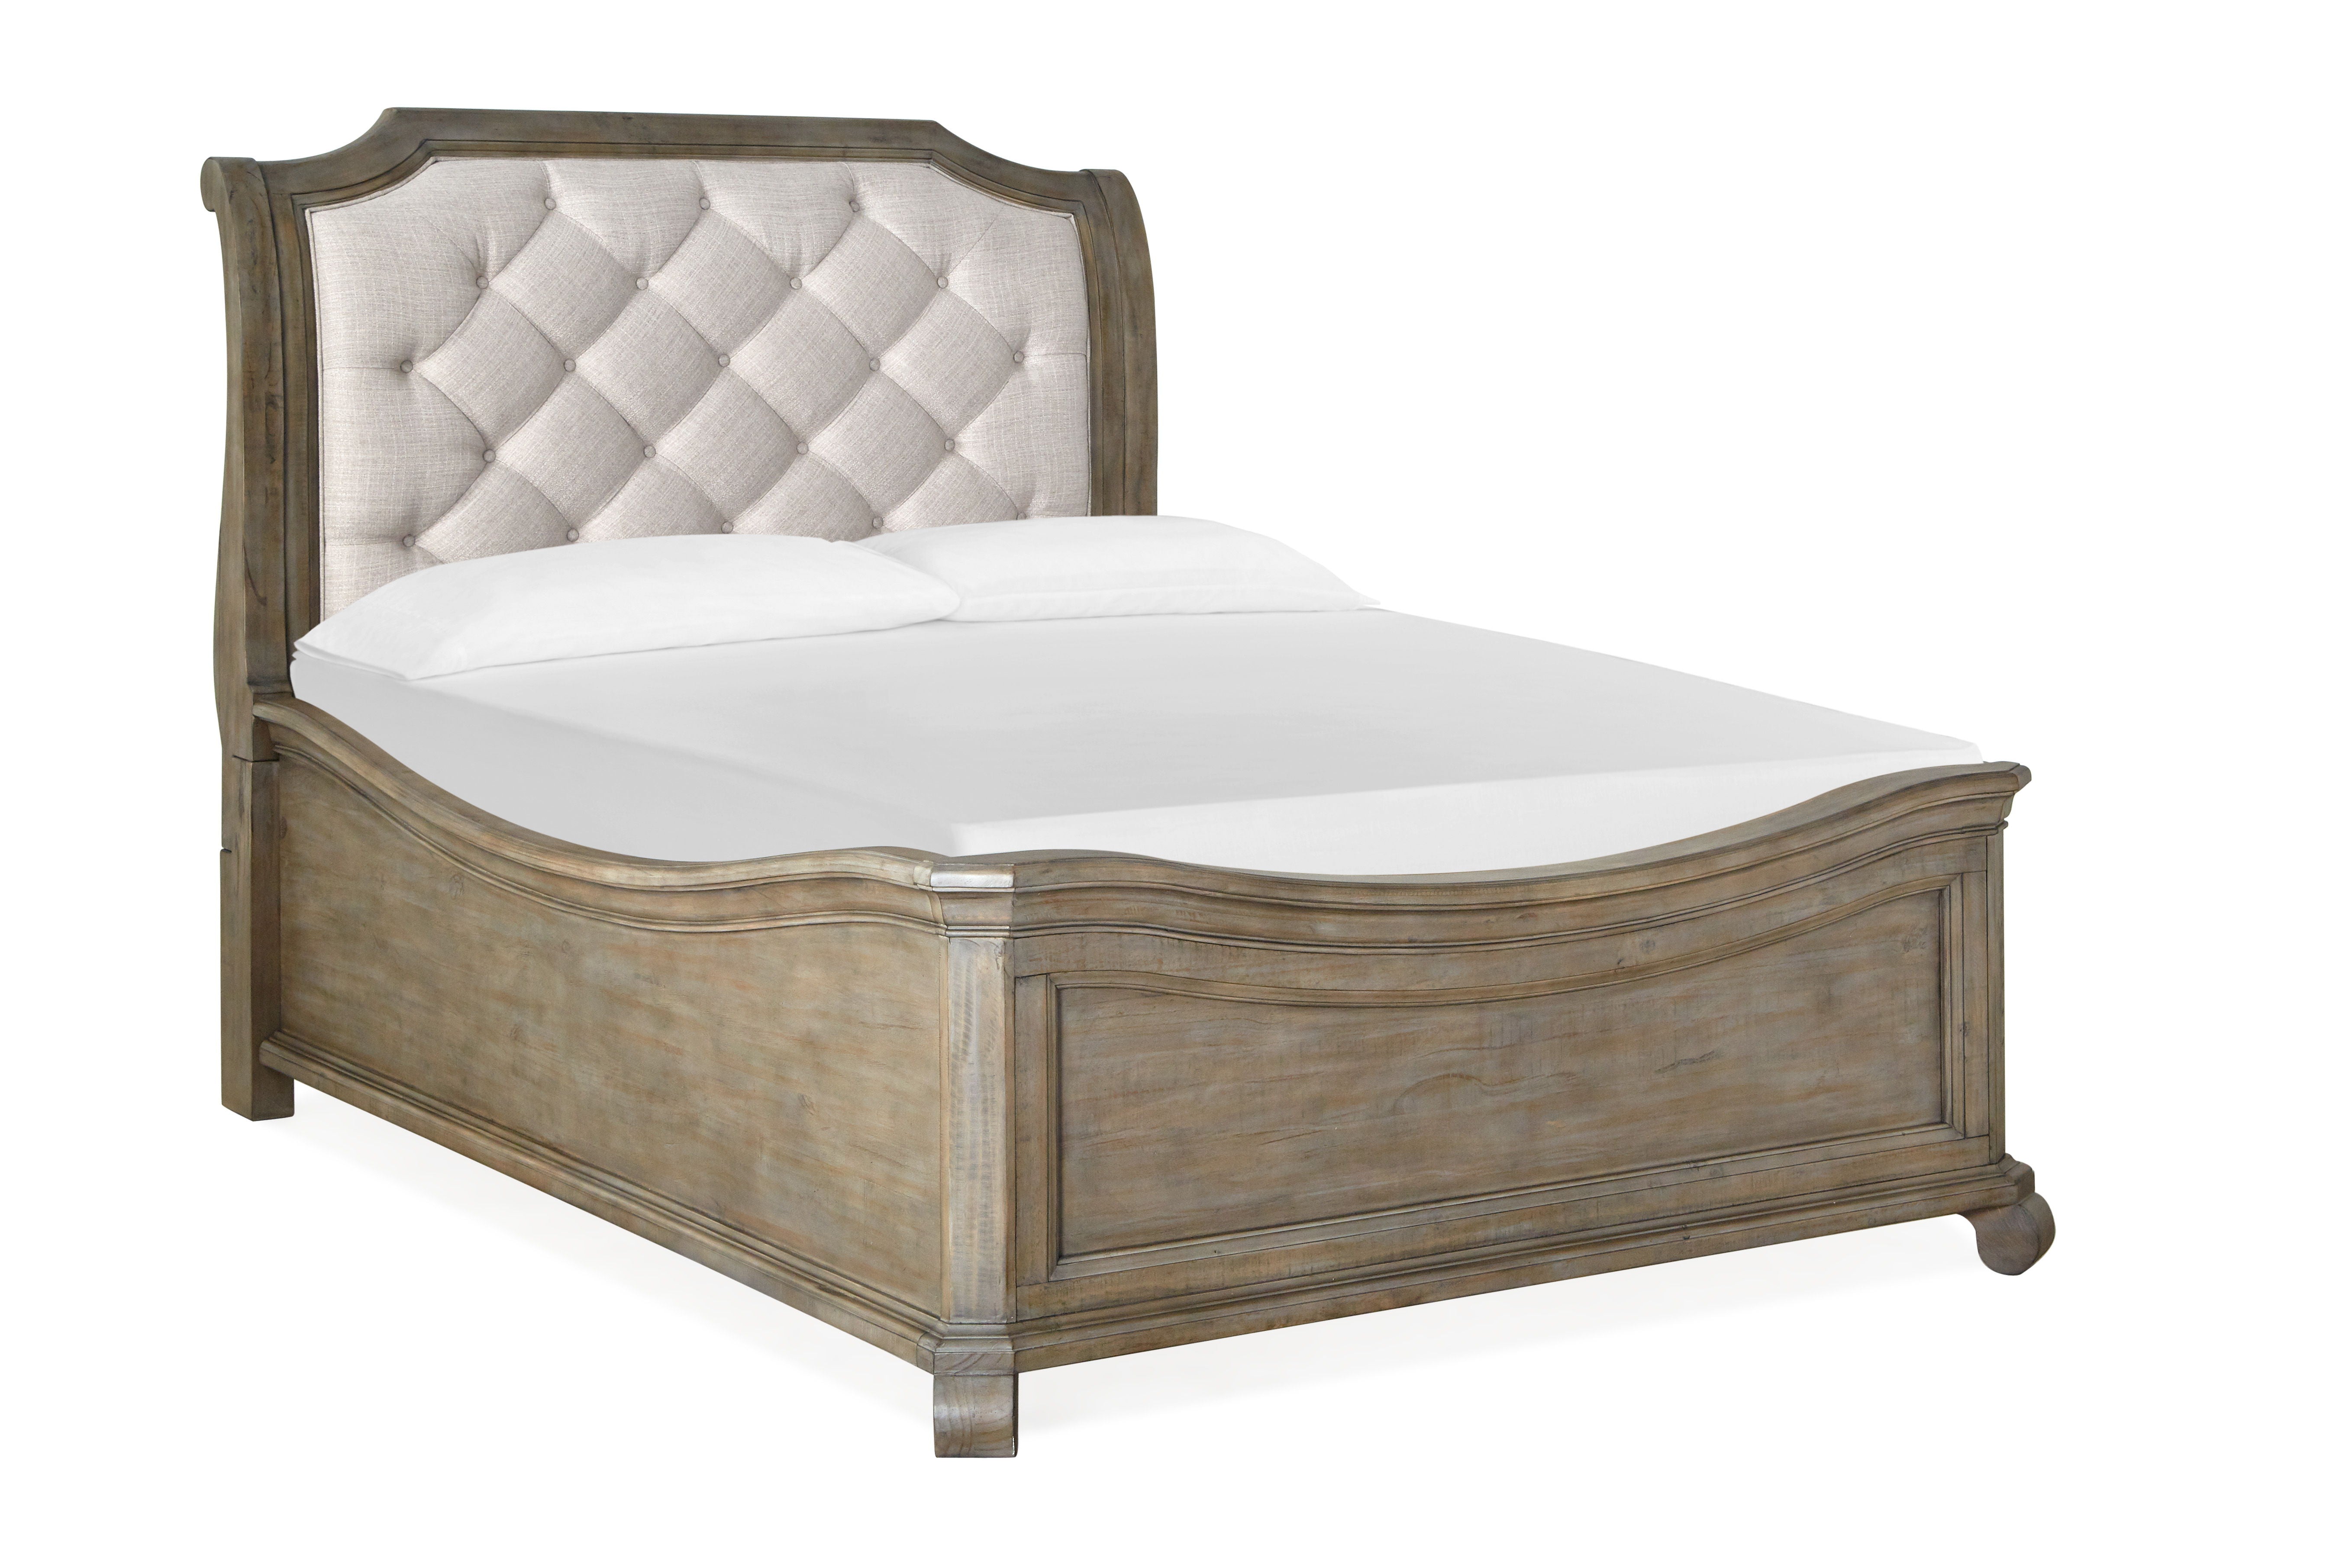 Tinley Park - Complete Sleigh Bed With Shaped Footboard